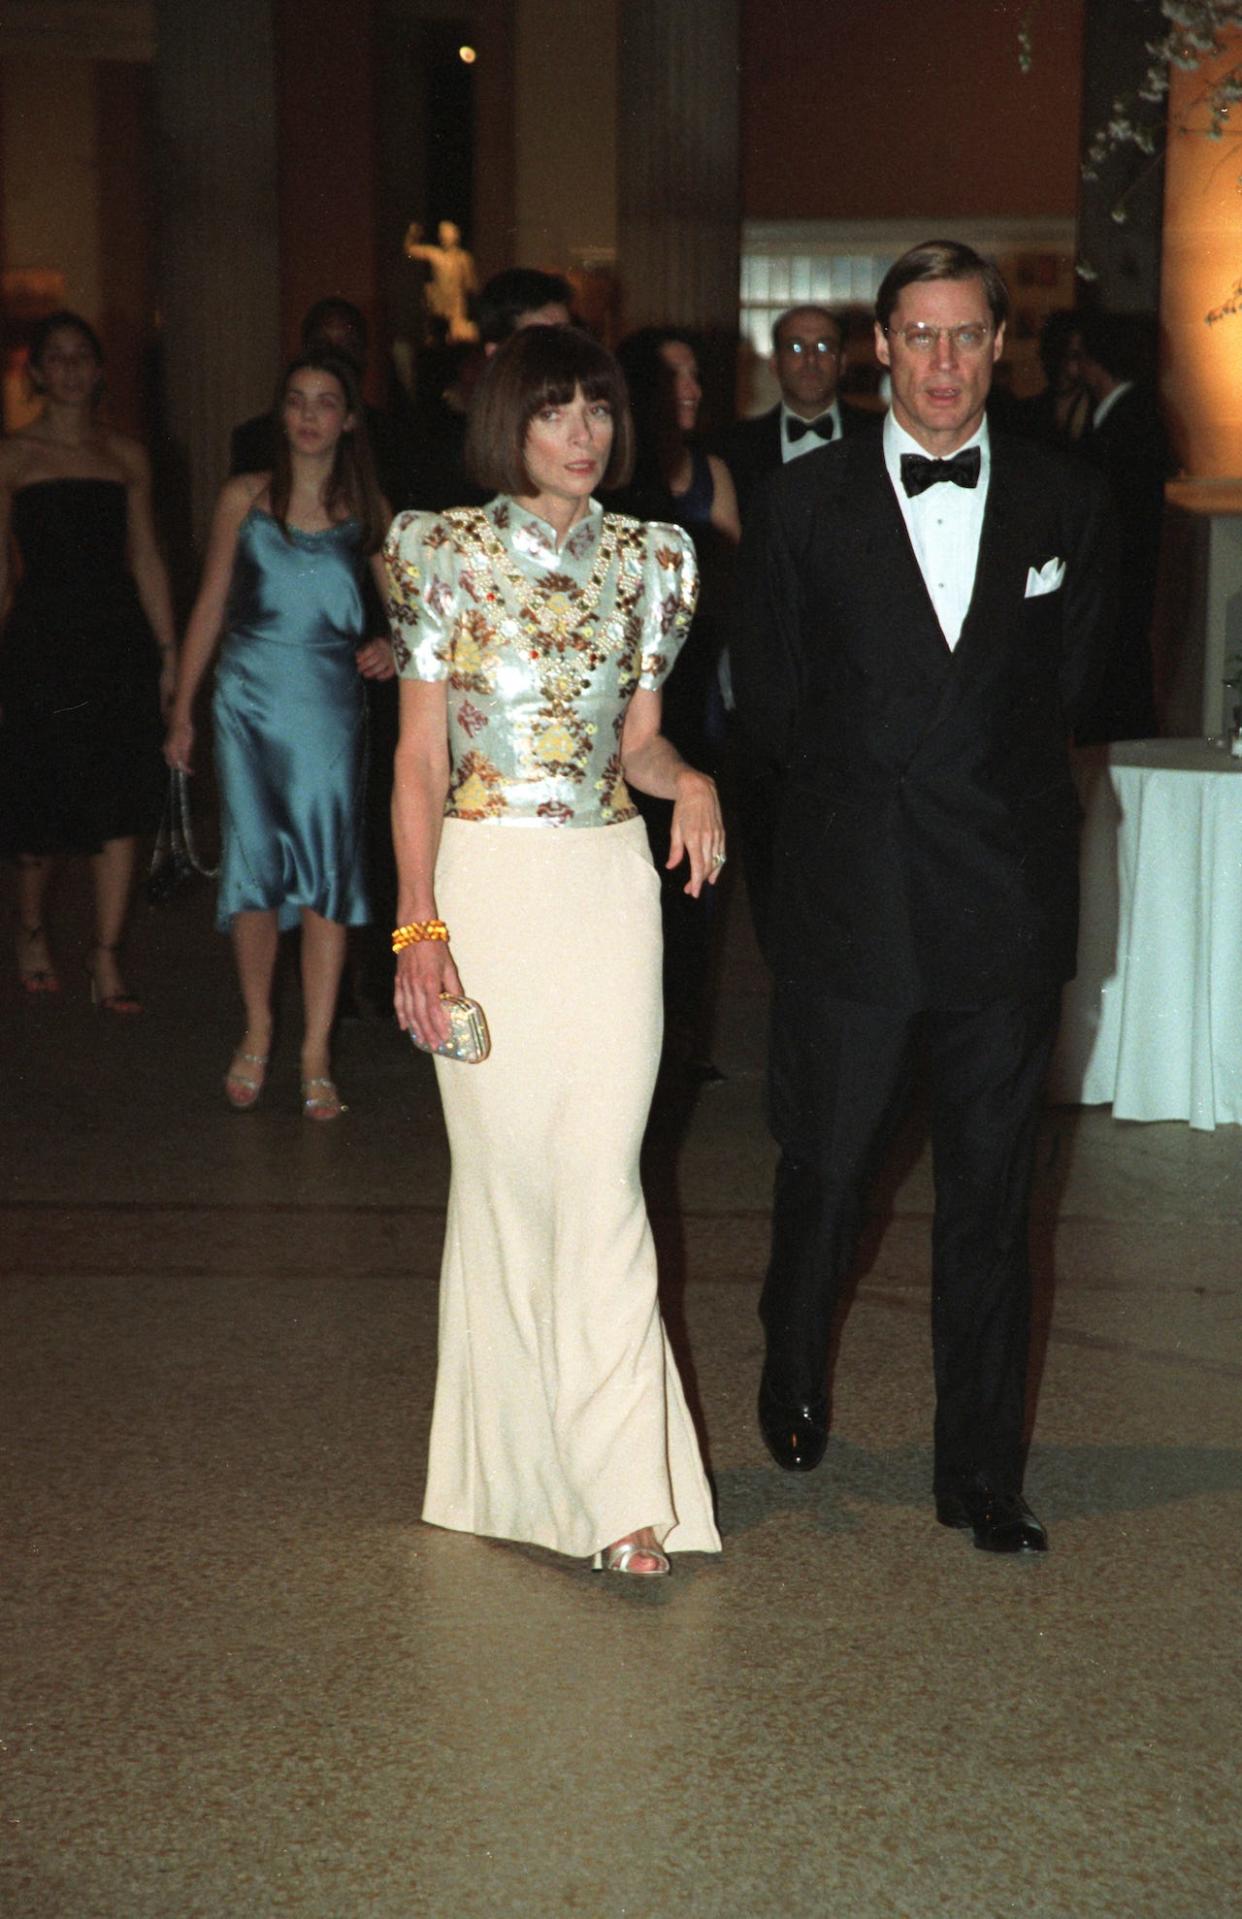 Anna Wintour and a friend at the 2001 Met Gala.